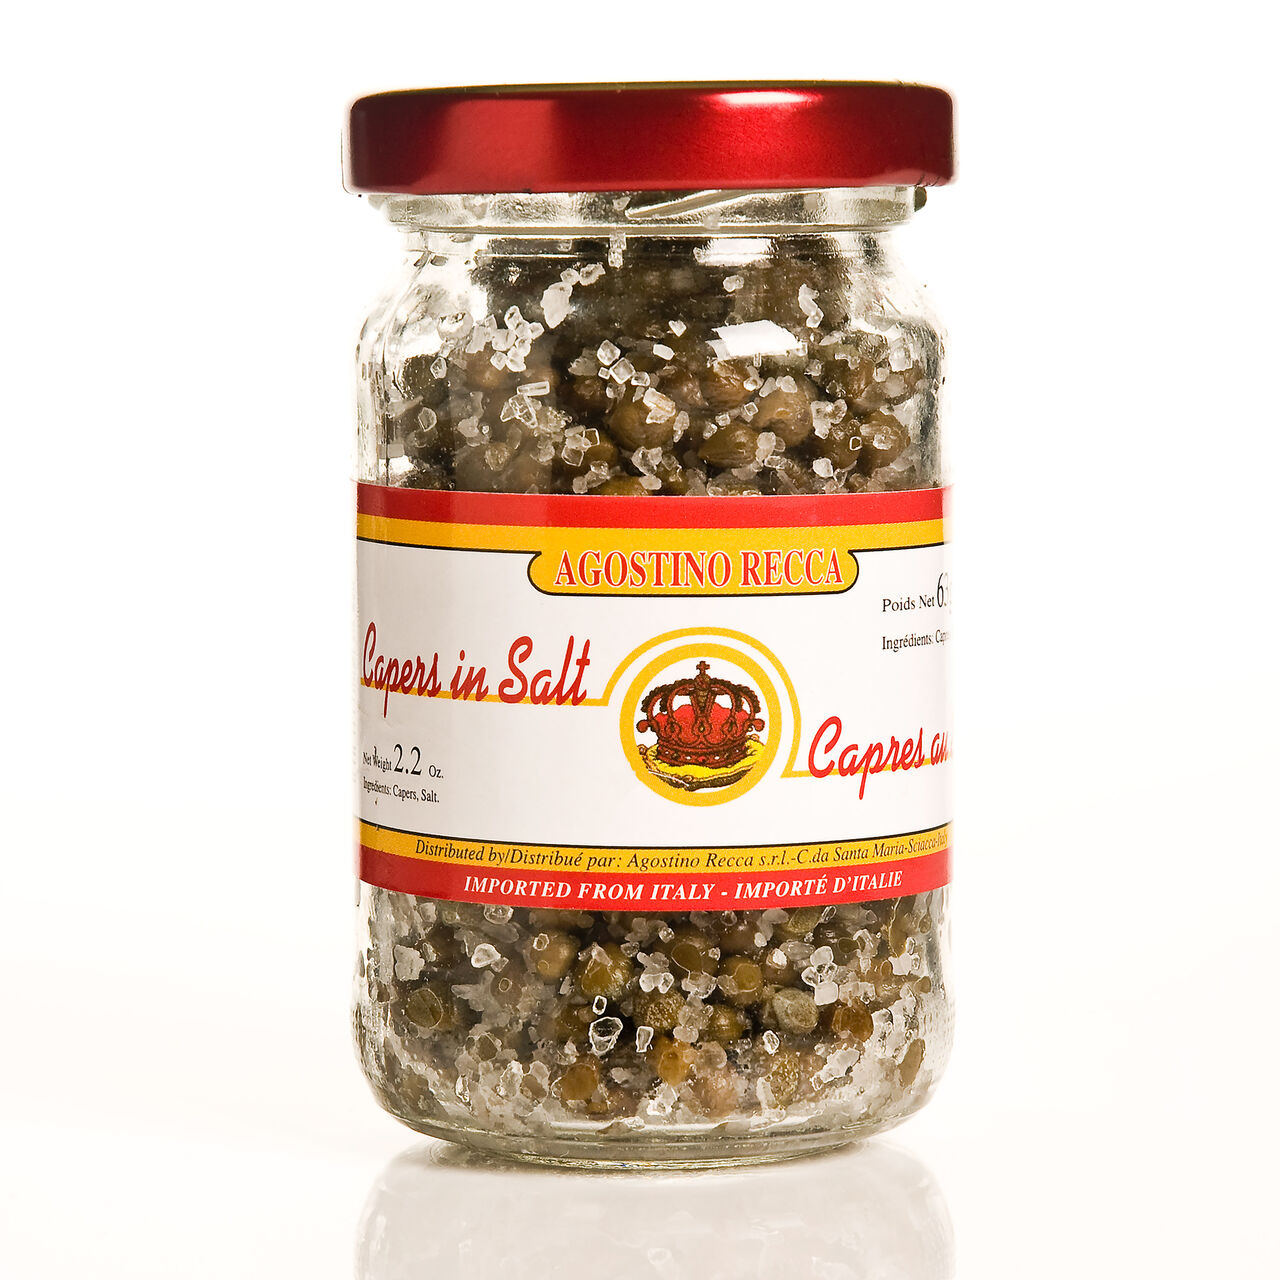 Agostino Recca Capers in Salt - 2.2oz, , large image number 0